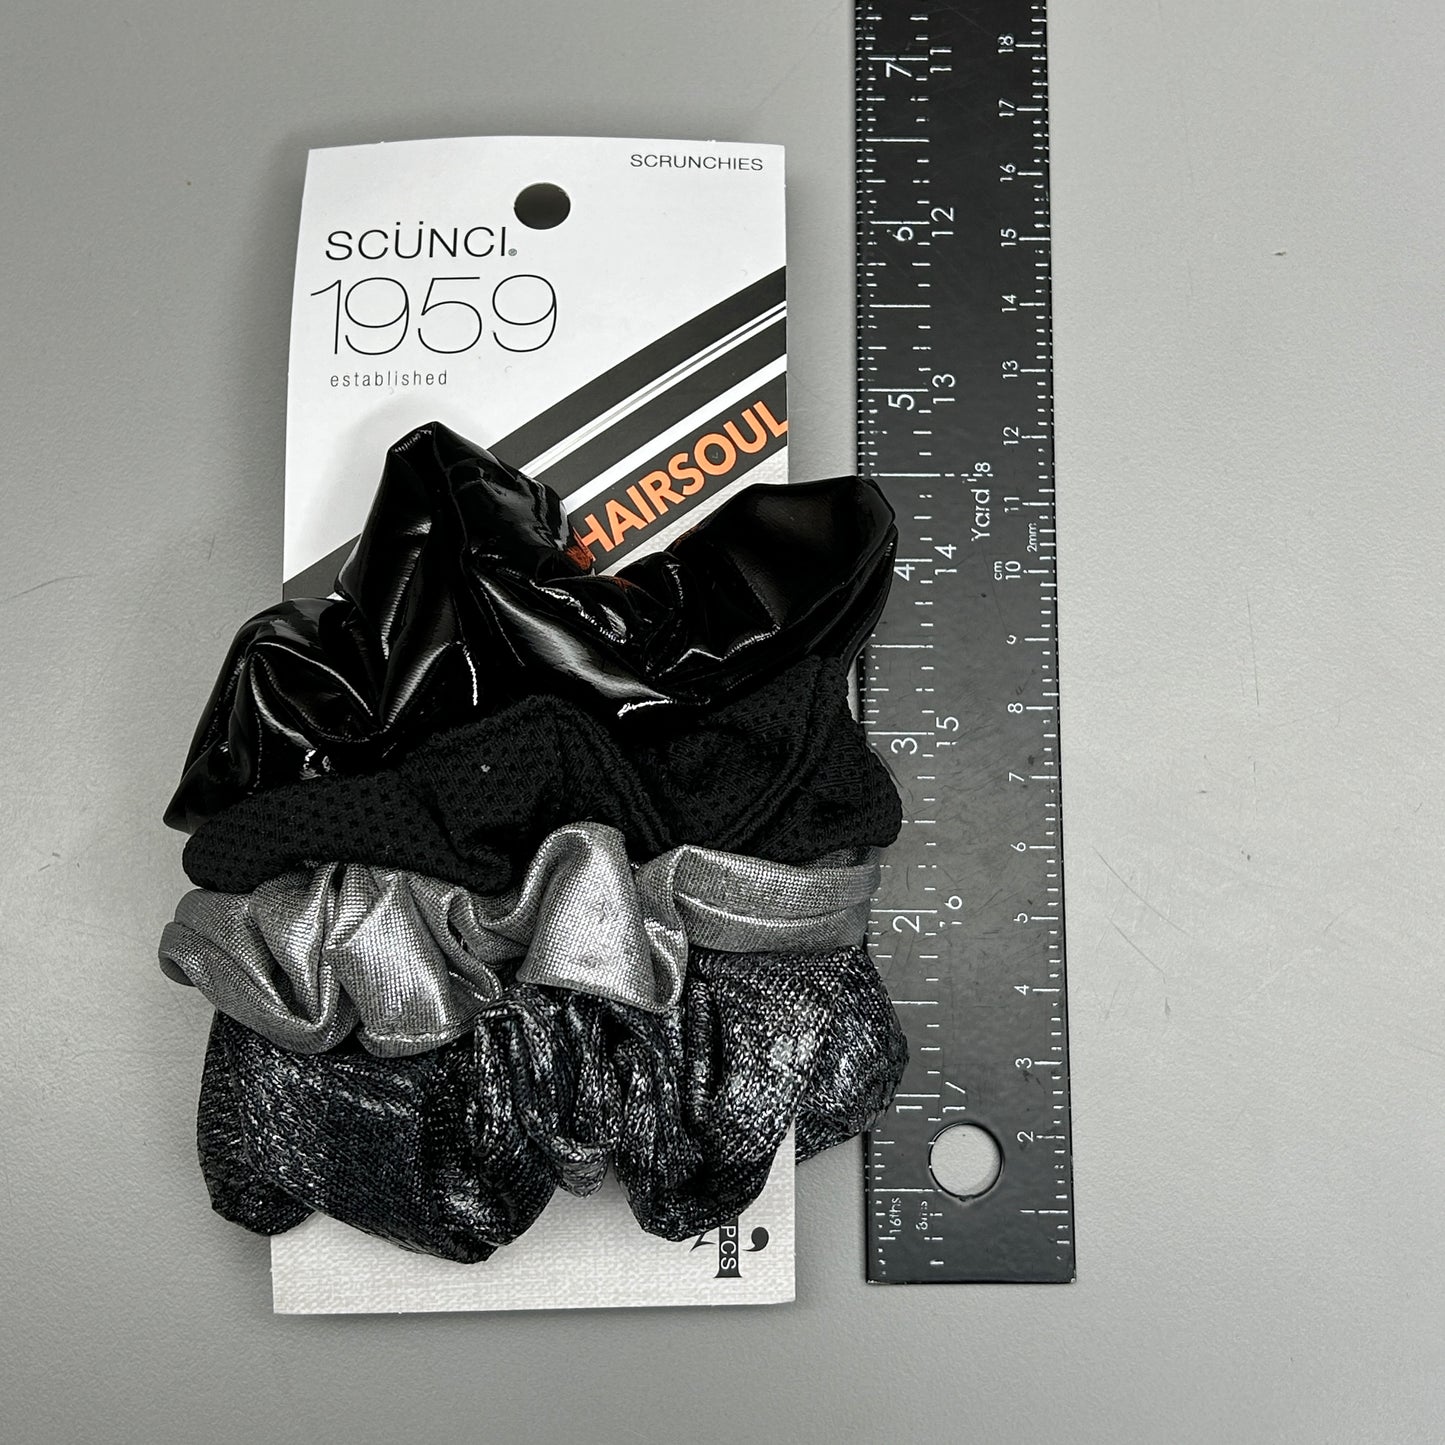 SCUNCI 3-PACK! Scrunchies 1959 Beauty Body Hair Soul 4-Pieces (New)